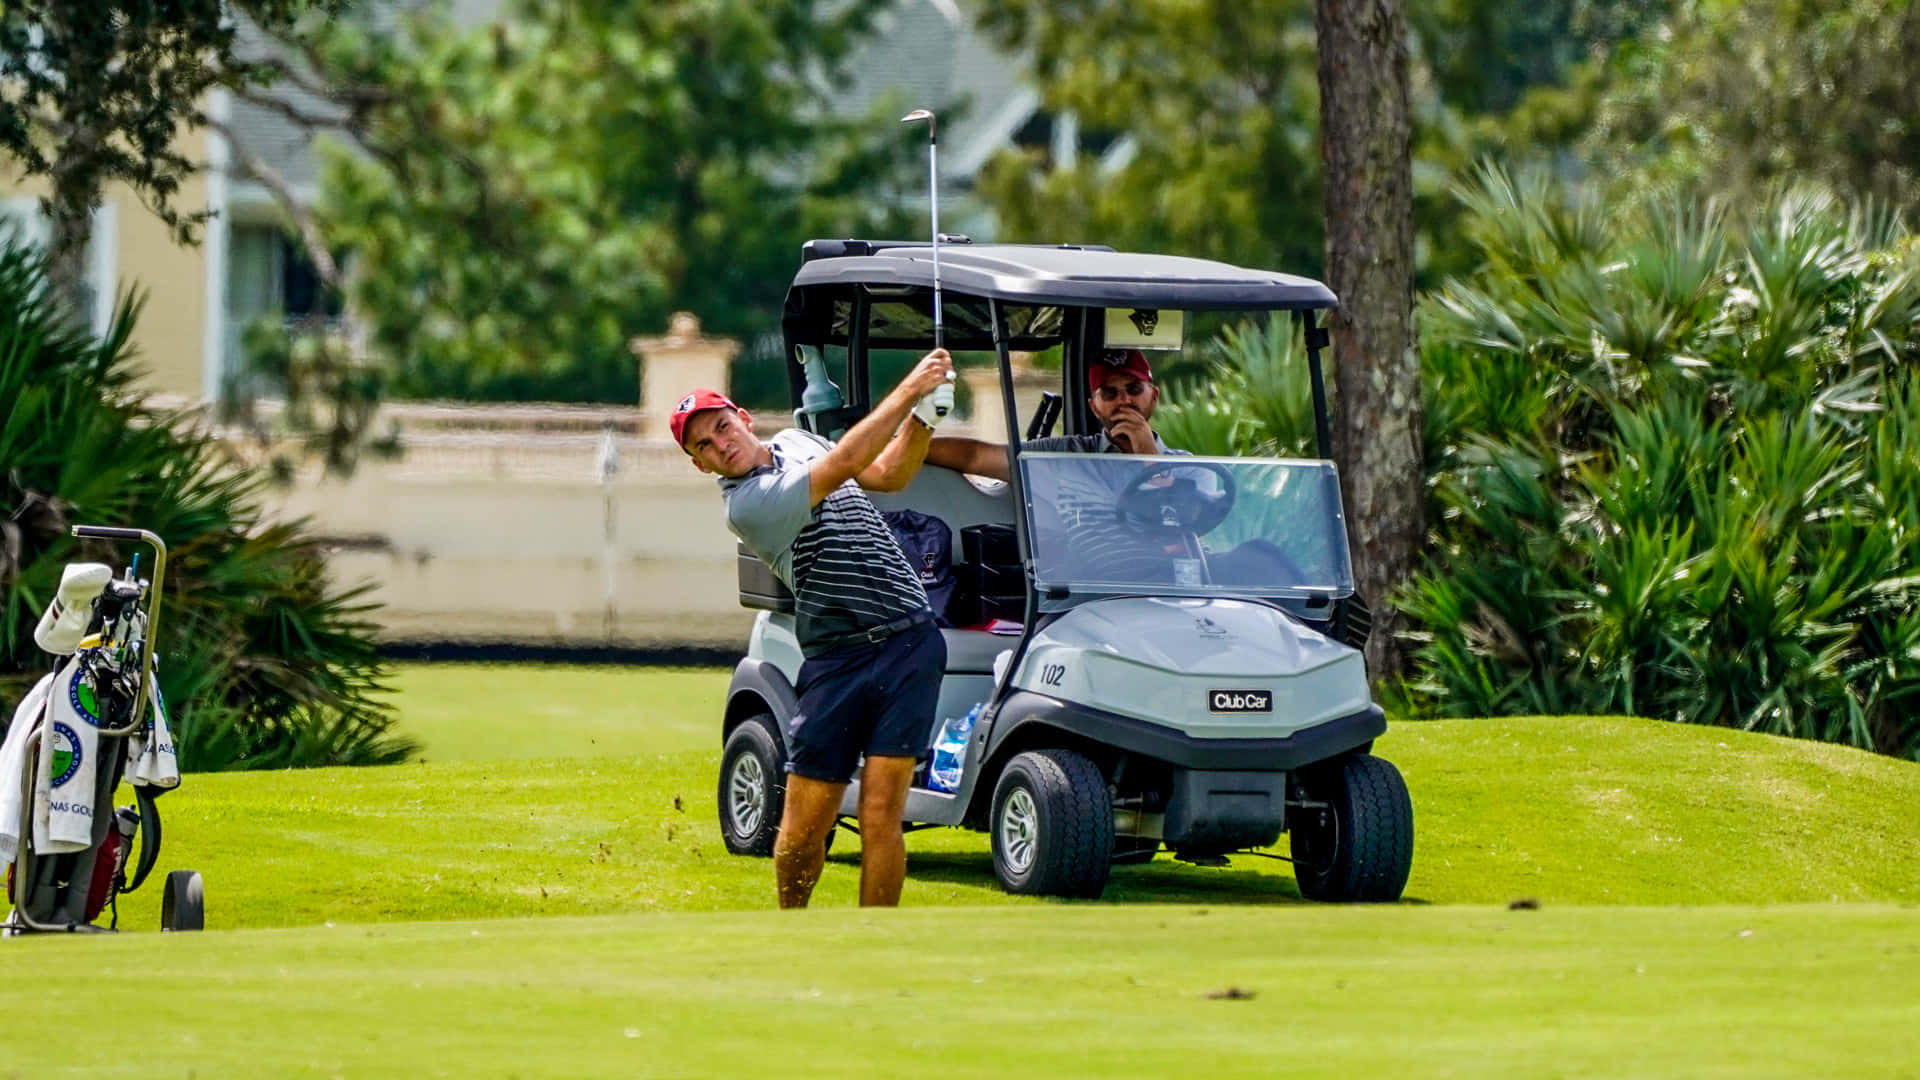 A Man Is Playing Golf With A Golf Cart Wallpaper